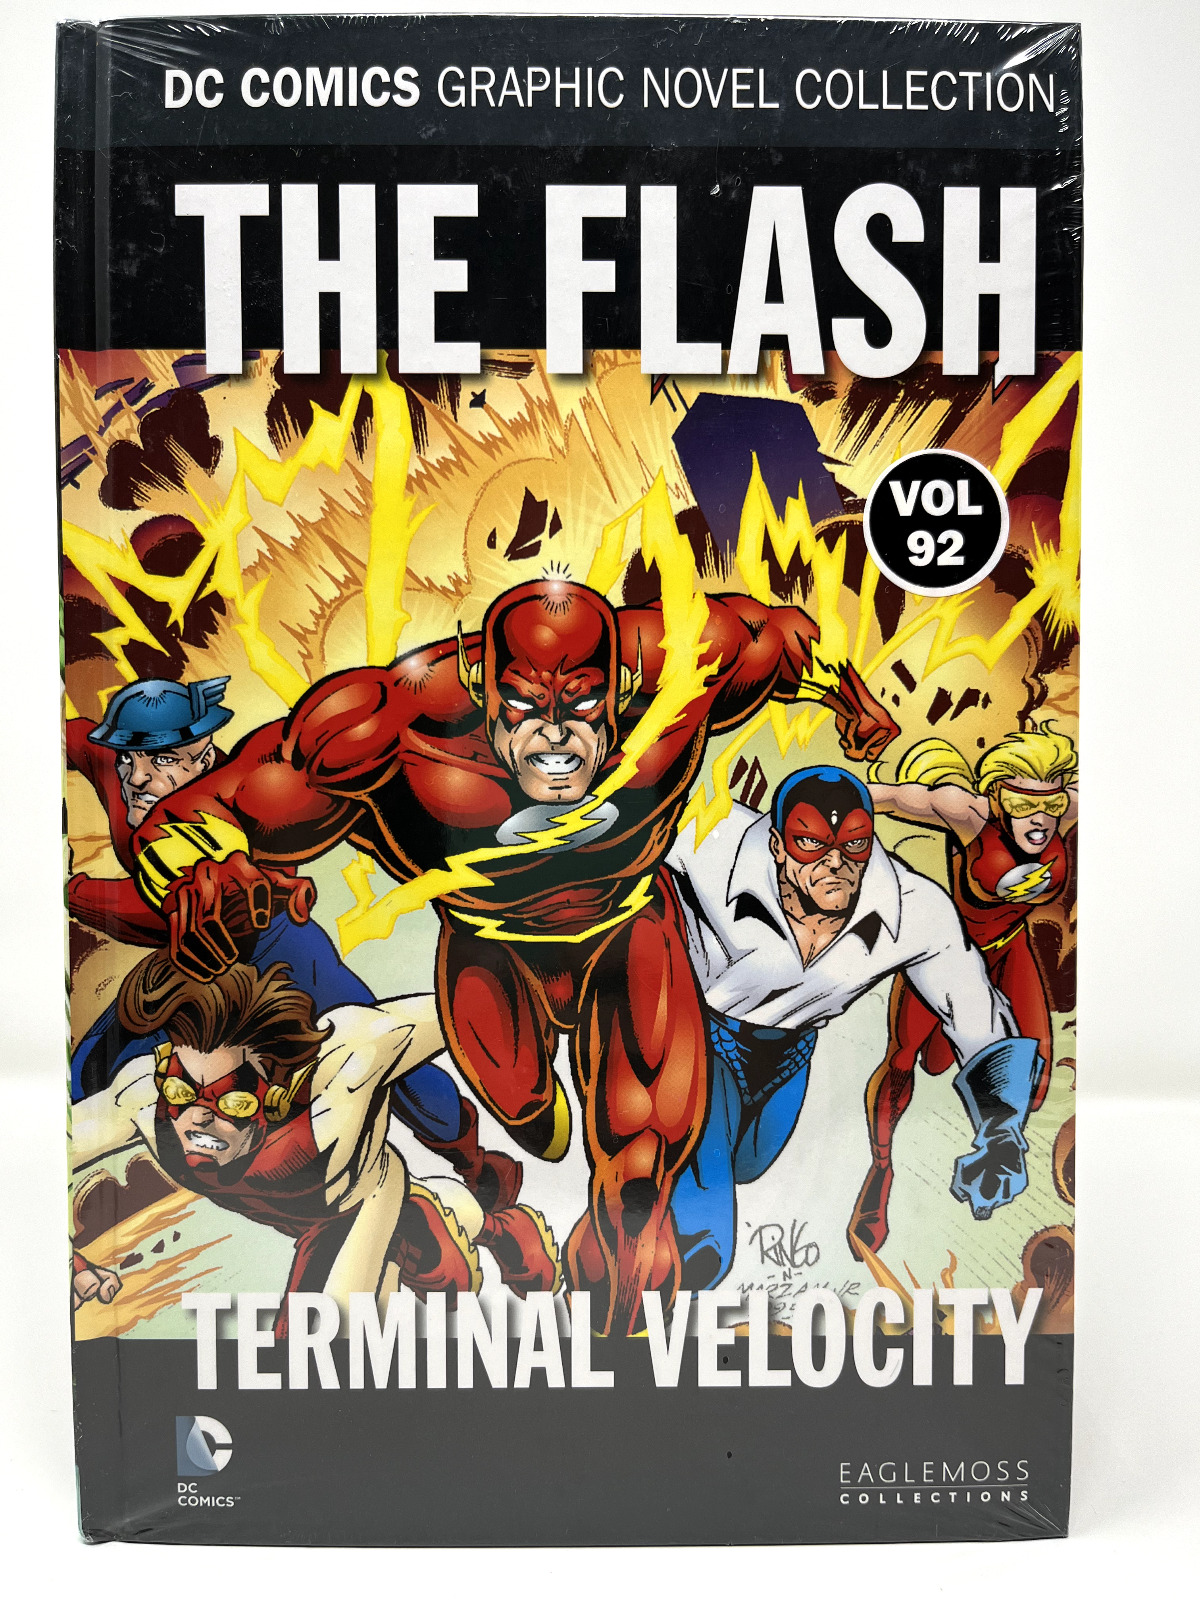 DC Graphic Novel Collection  The Flash Terminal Velocity Volume 92 by Eaglemoss